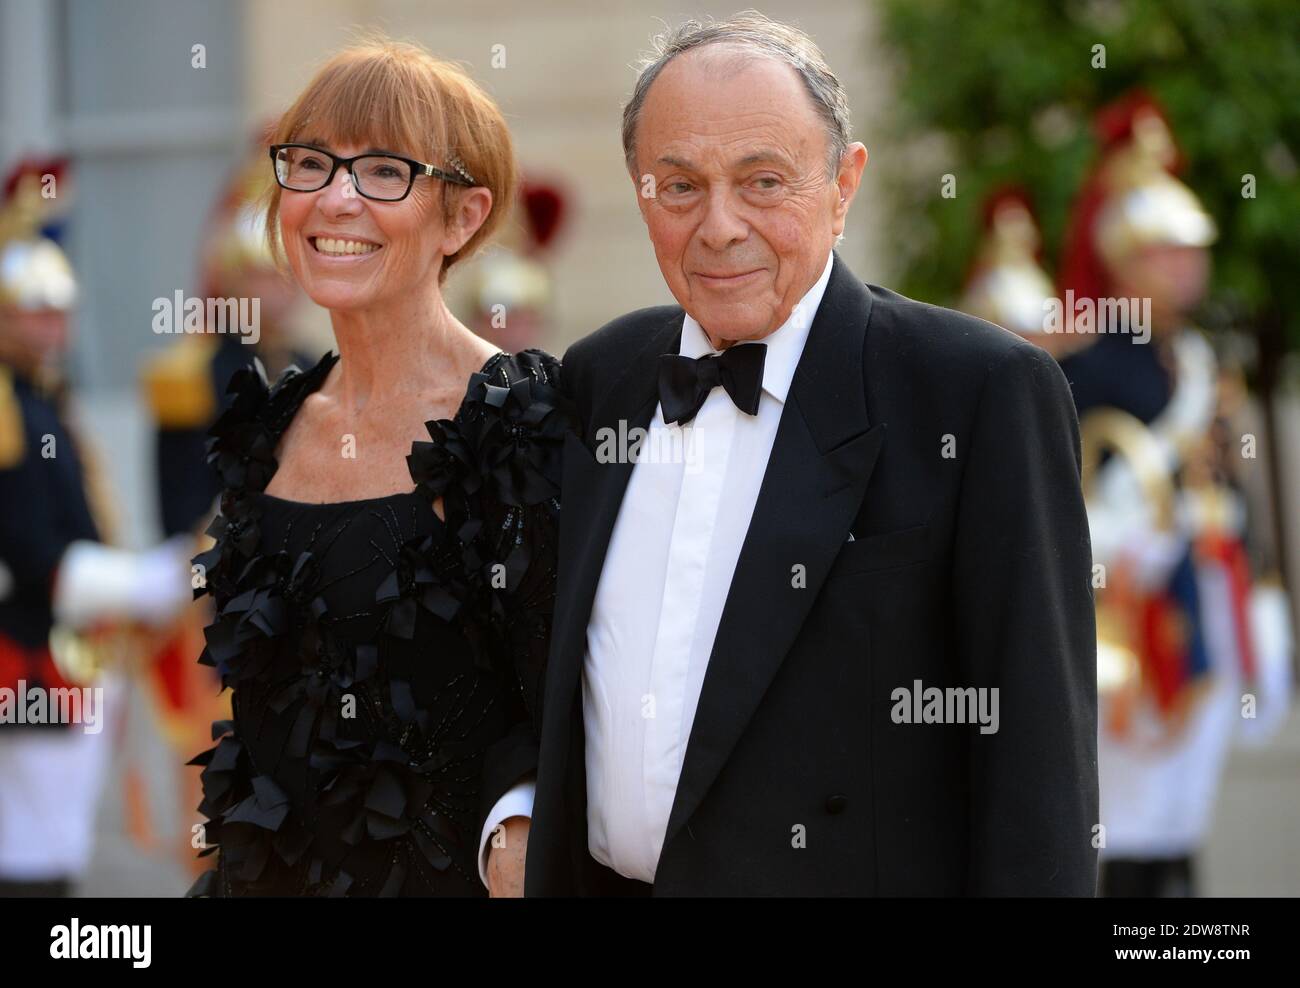 Former Prime Minister Michel Rocard and his wife Sylvie Rocard attend the State Banquet given in honour of HM The Queen Elizabeth II by French President Francois Hollande at the Elysee Palace, as part of the official ceremonies of the 70th Anniversary of the D Day, on June 6, 2014, in Paris, France. Photo by Christian Liewig/ABACAPRESS.COM Stock Photo